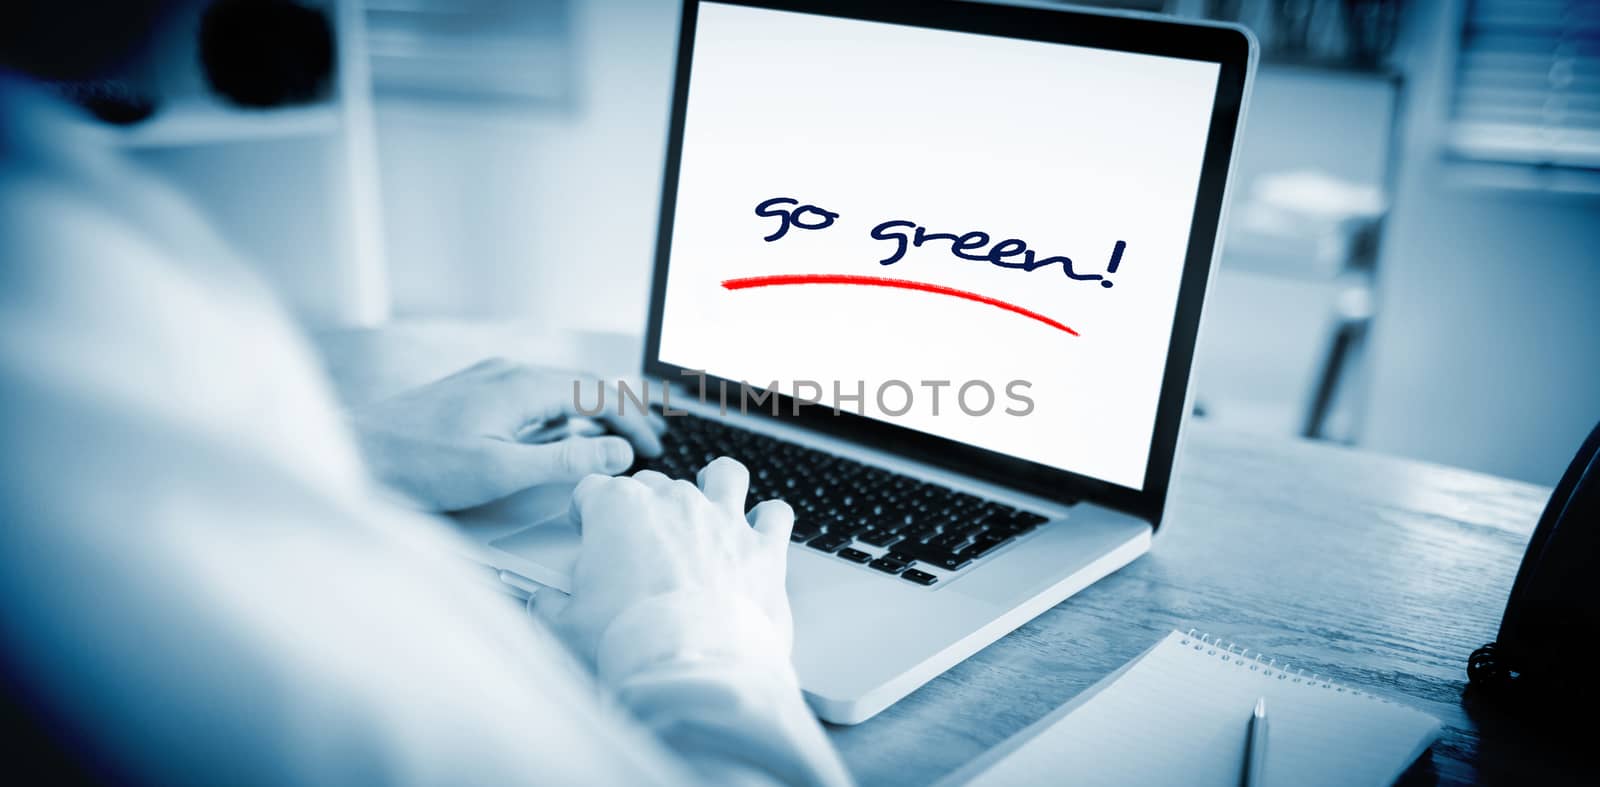 The word go green! against businessman working on his laptop